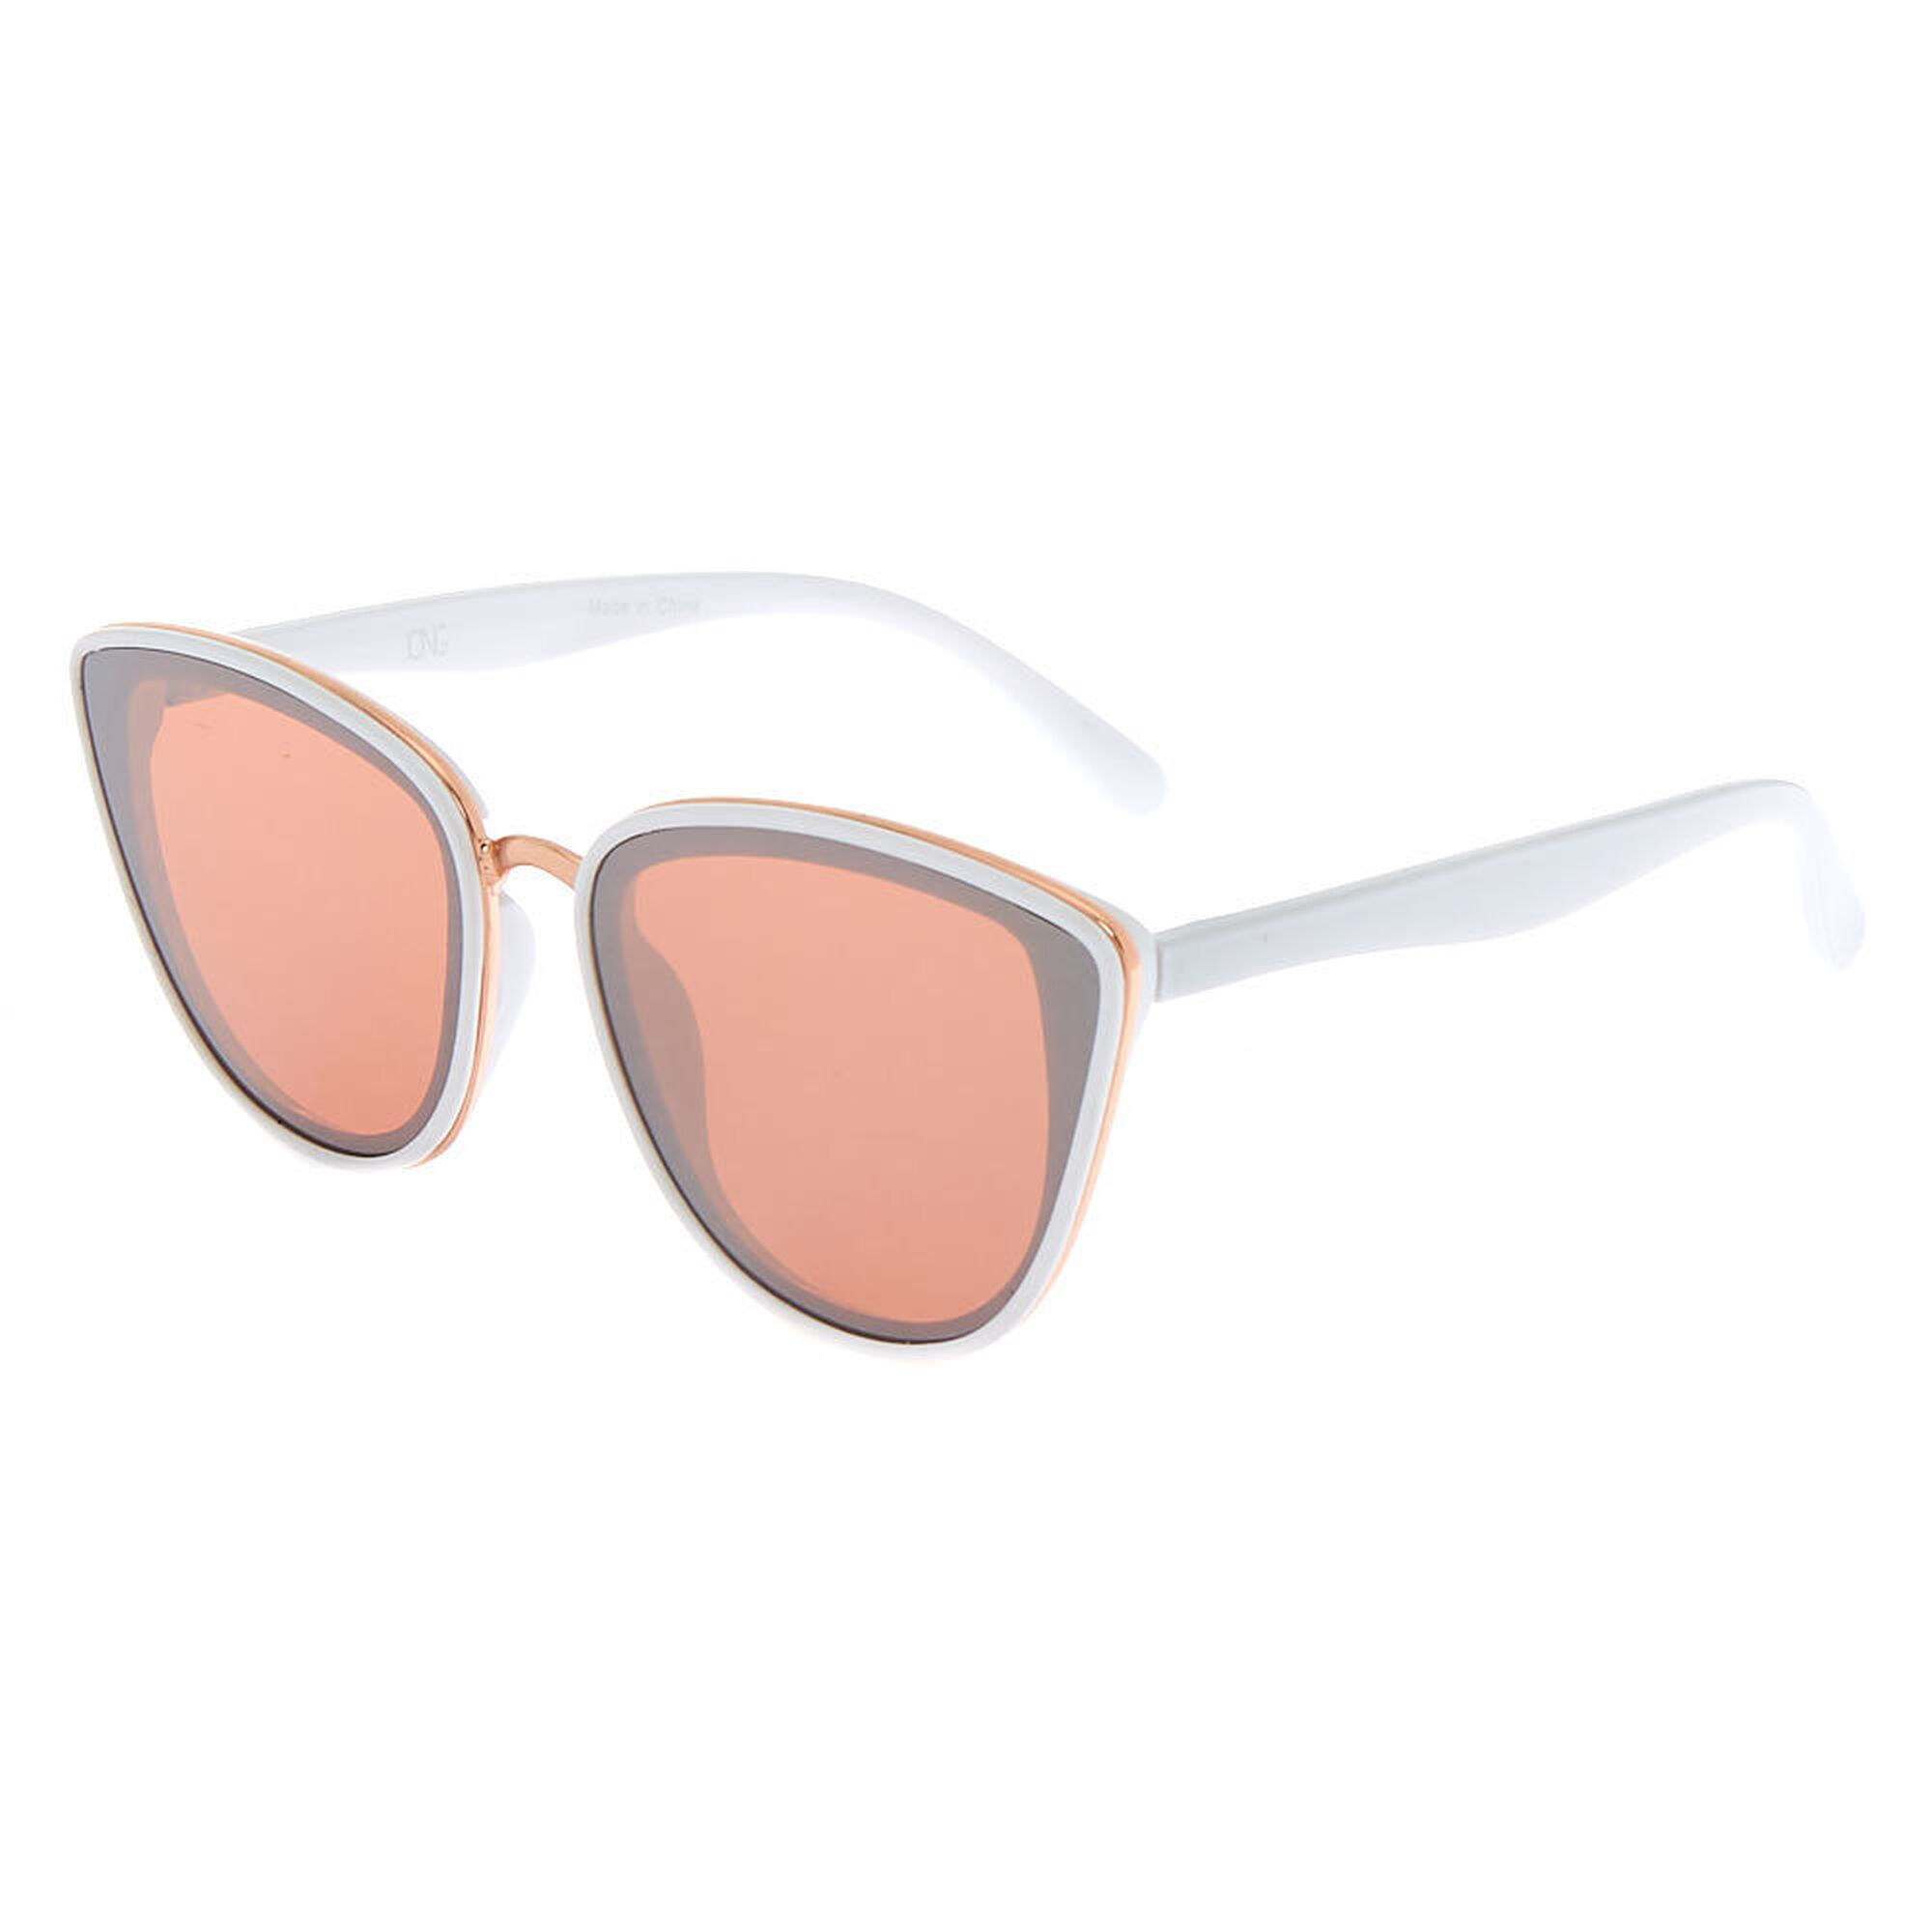 View Claires Mirrored Mod Cat Eye Sunglasses White information